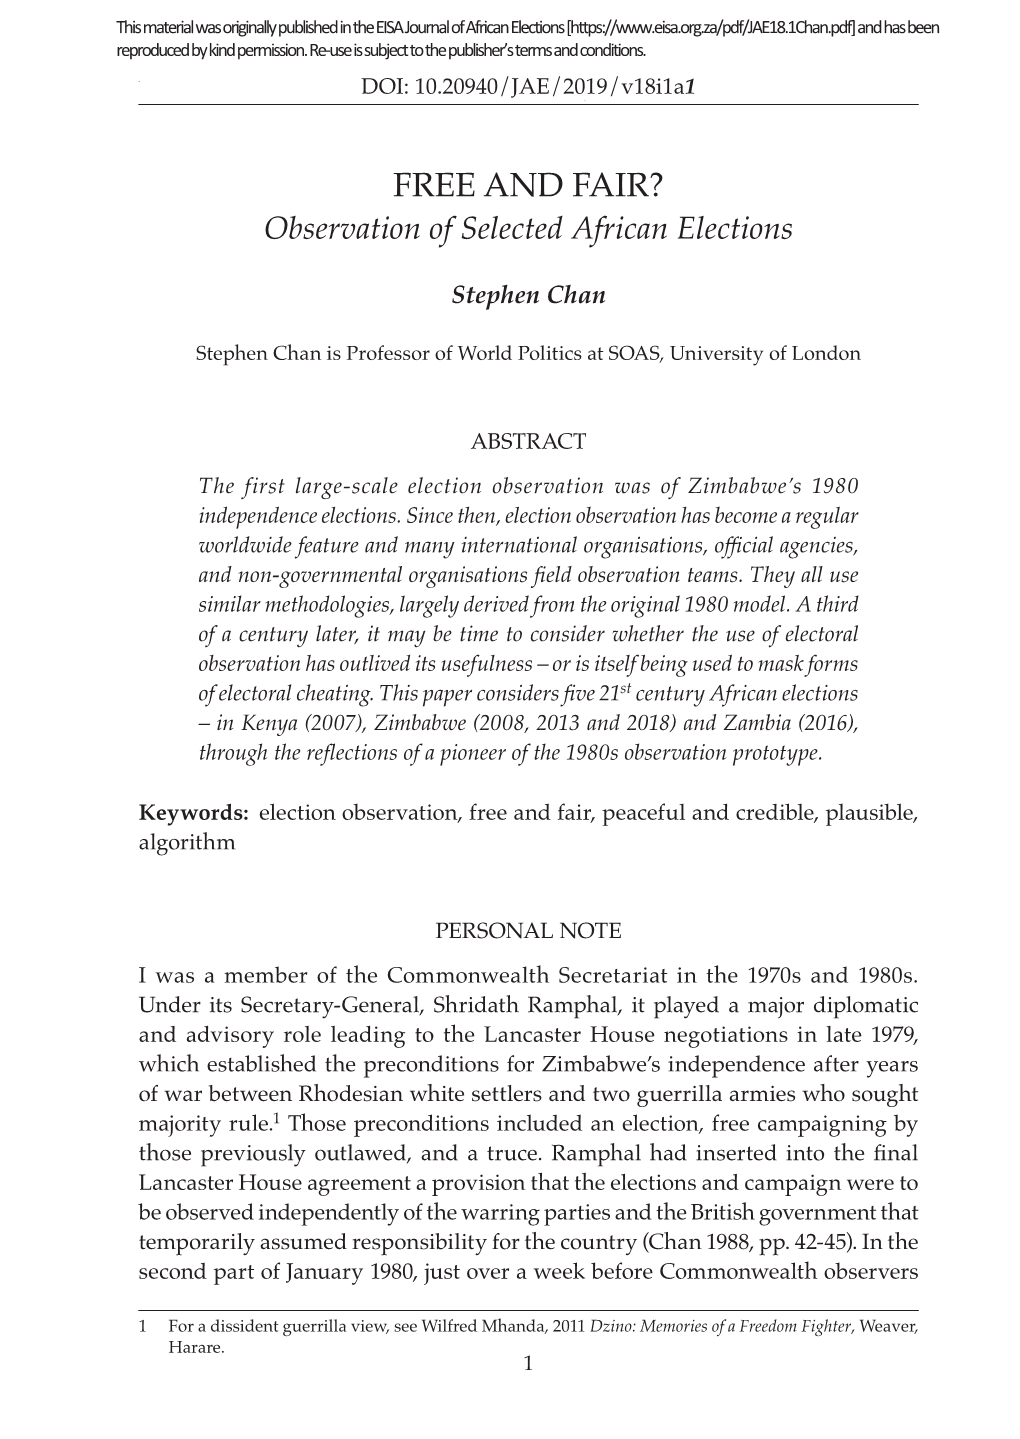 FREE and FAIR? Observation of Selected African Elections